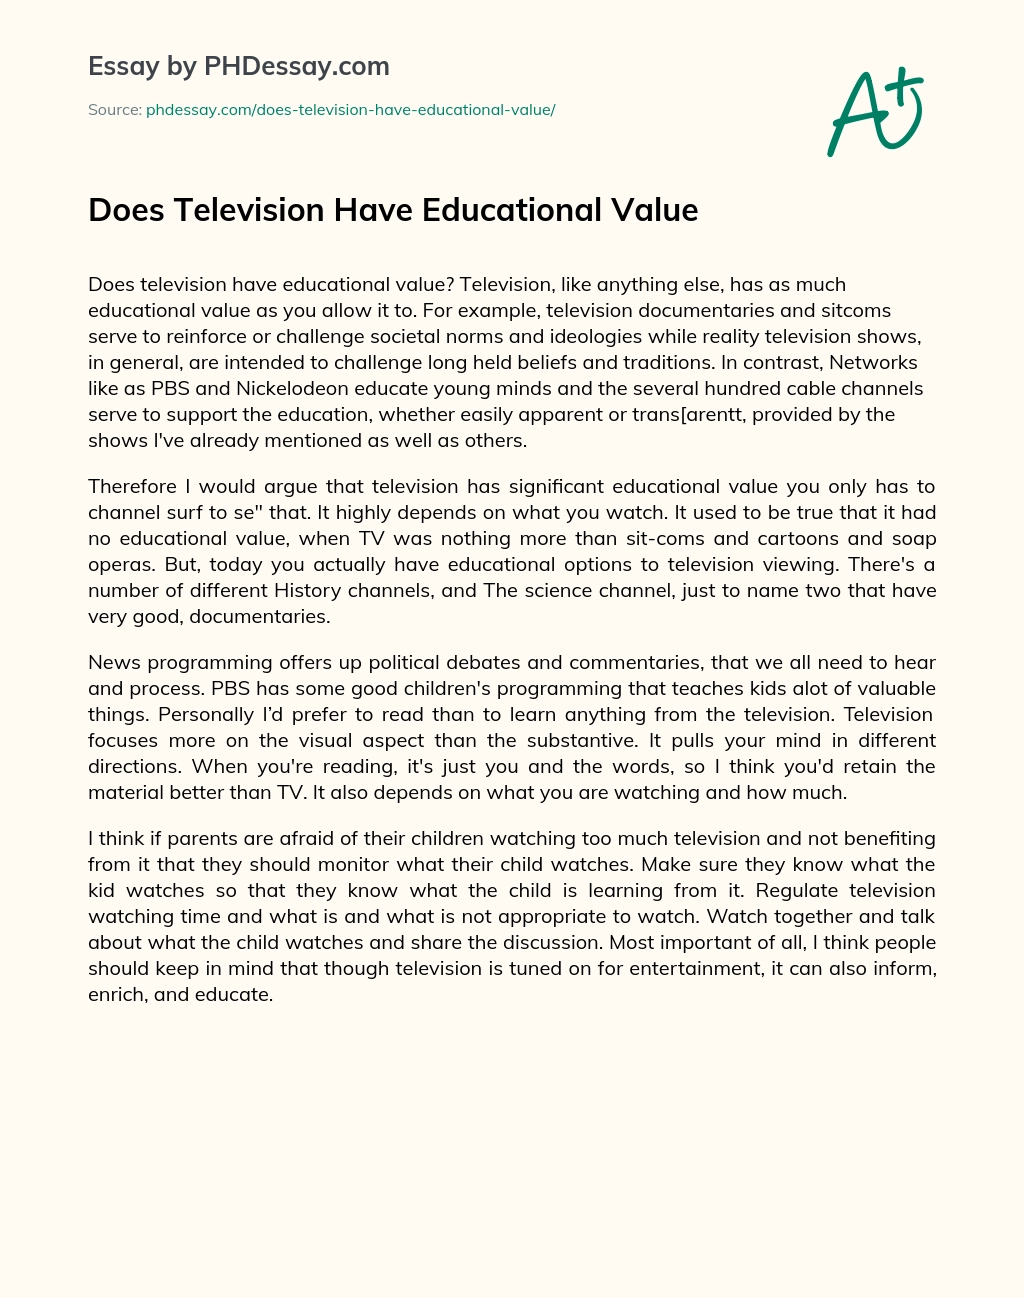 speech on the educational value of television